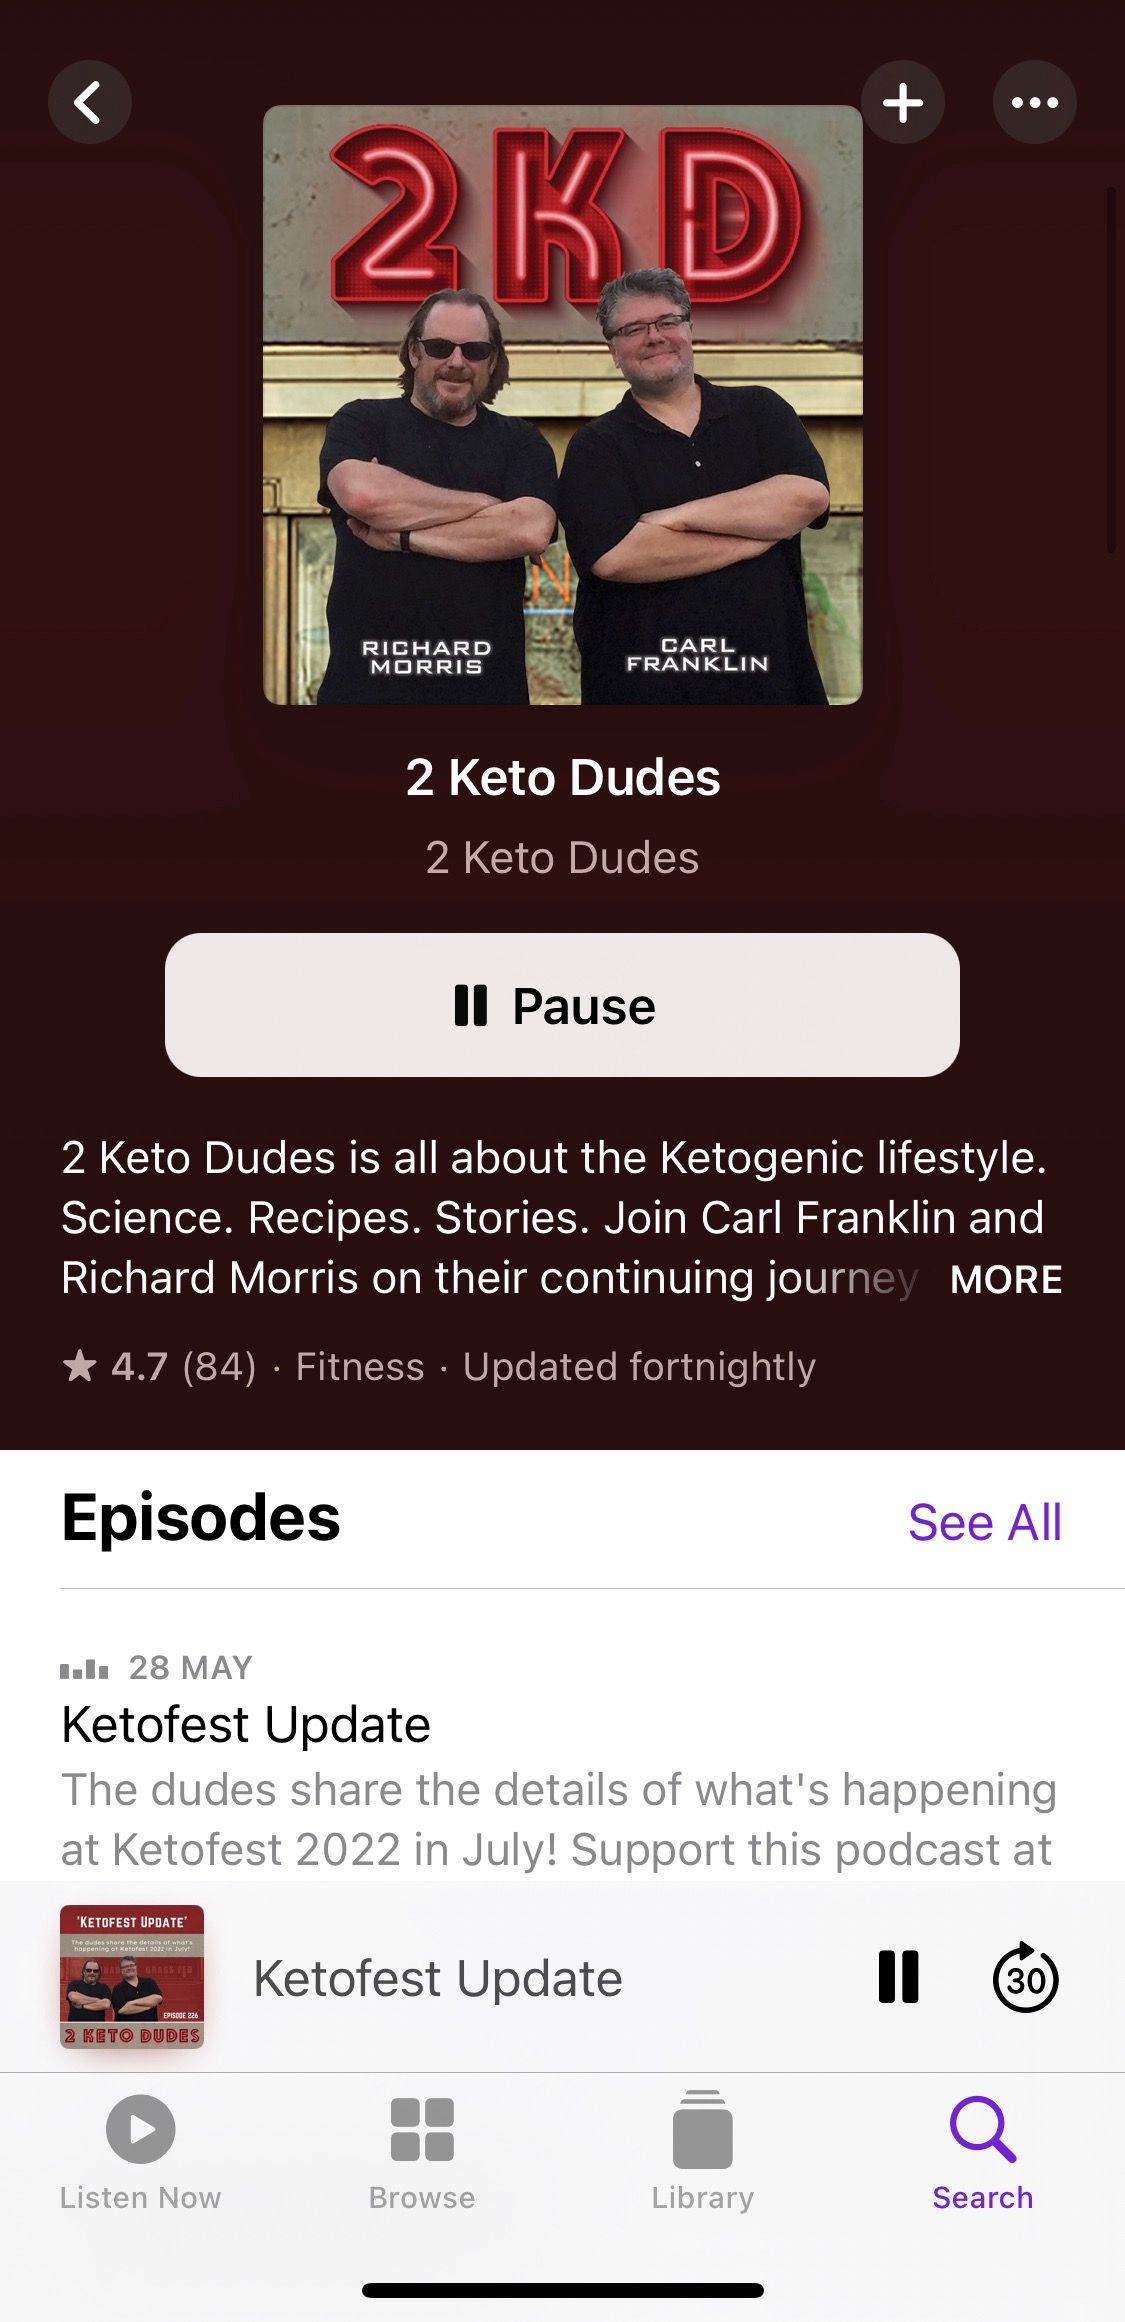 Screenshot showing The 2 Keto Dudes Podcast home screen